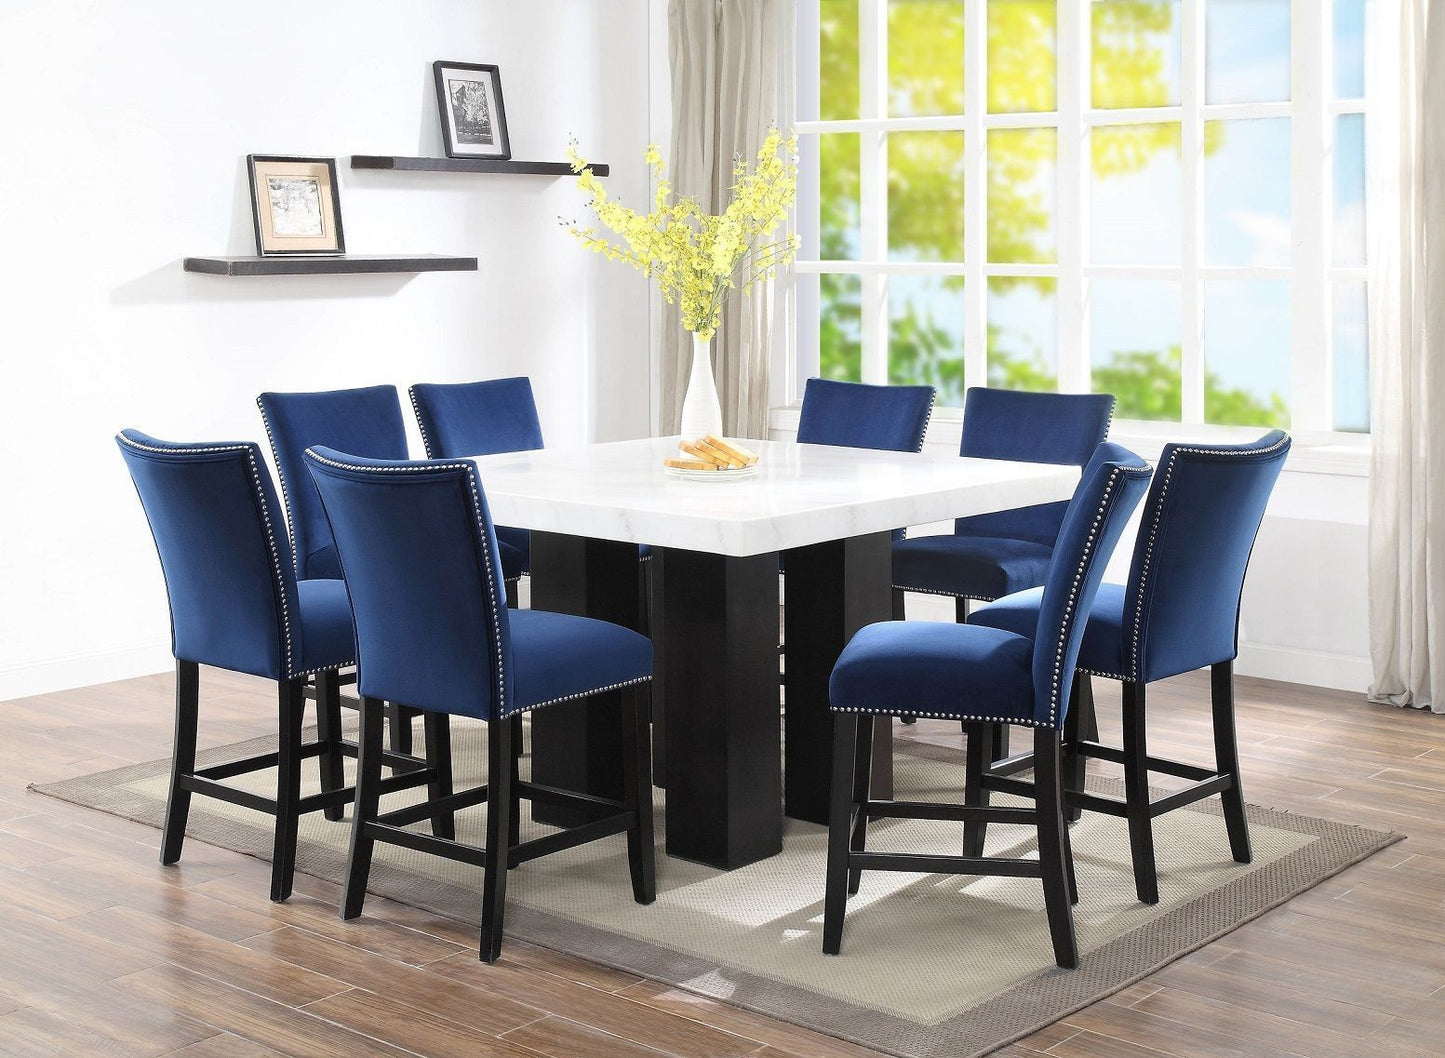 Camila Blue Velvet Counter Height Chairs (includes 2 chairs) by Steve Silver